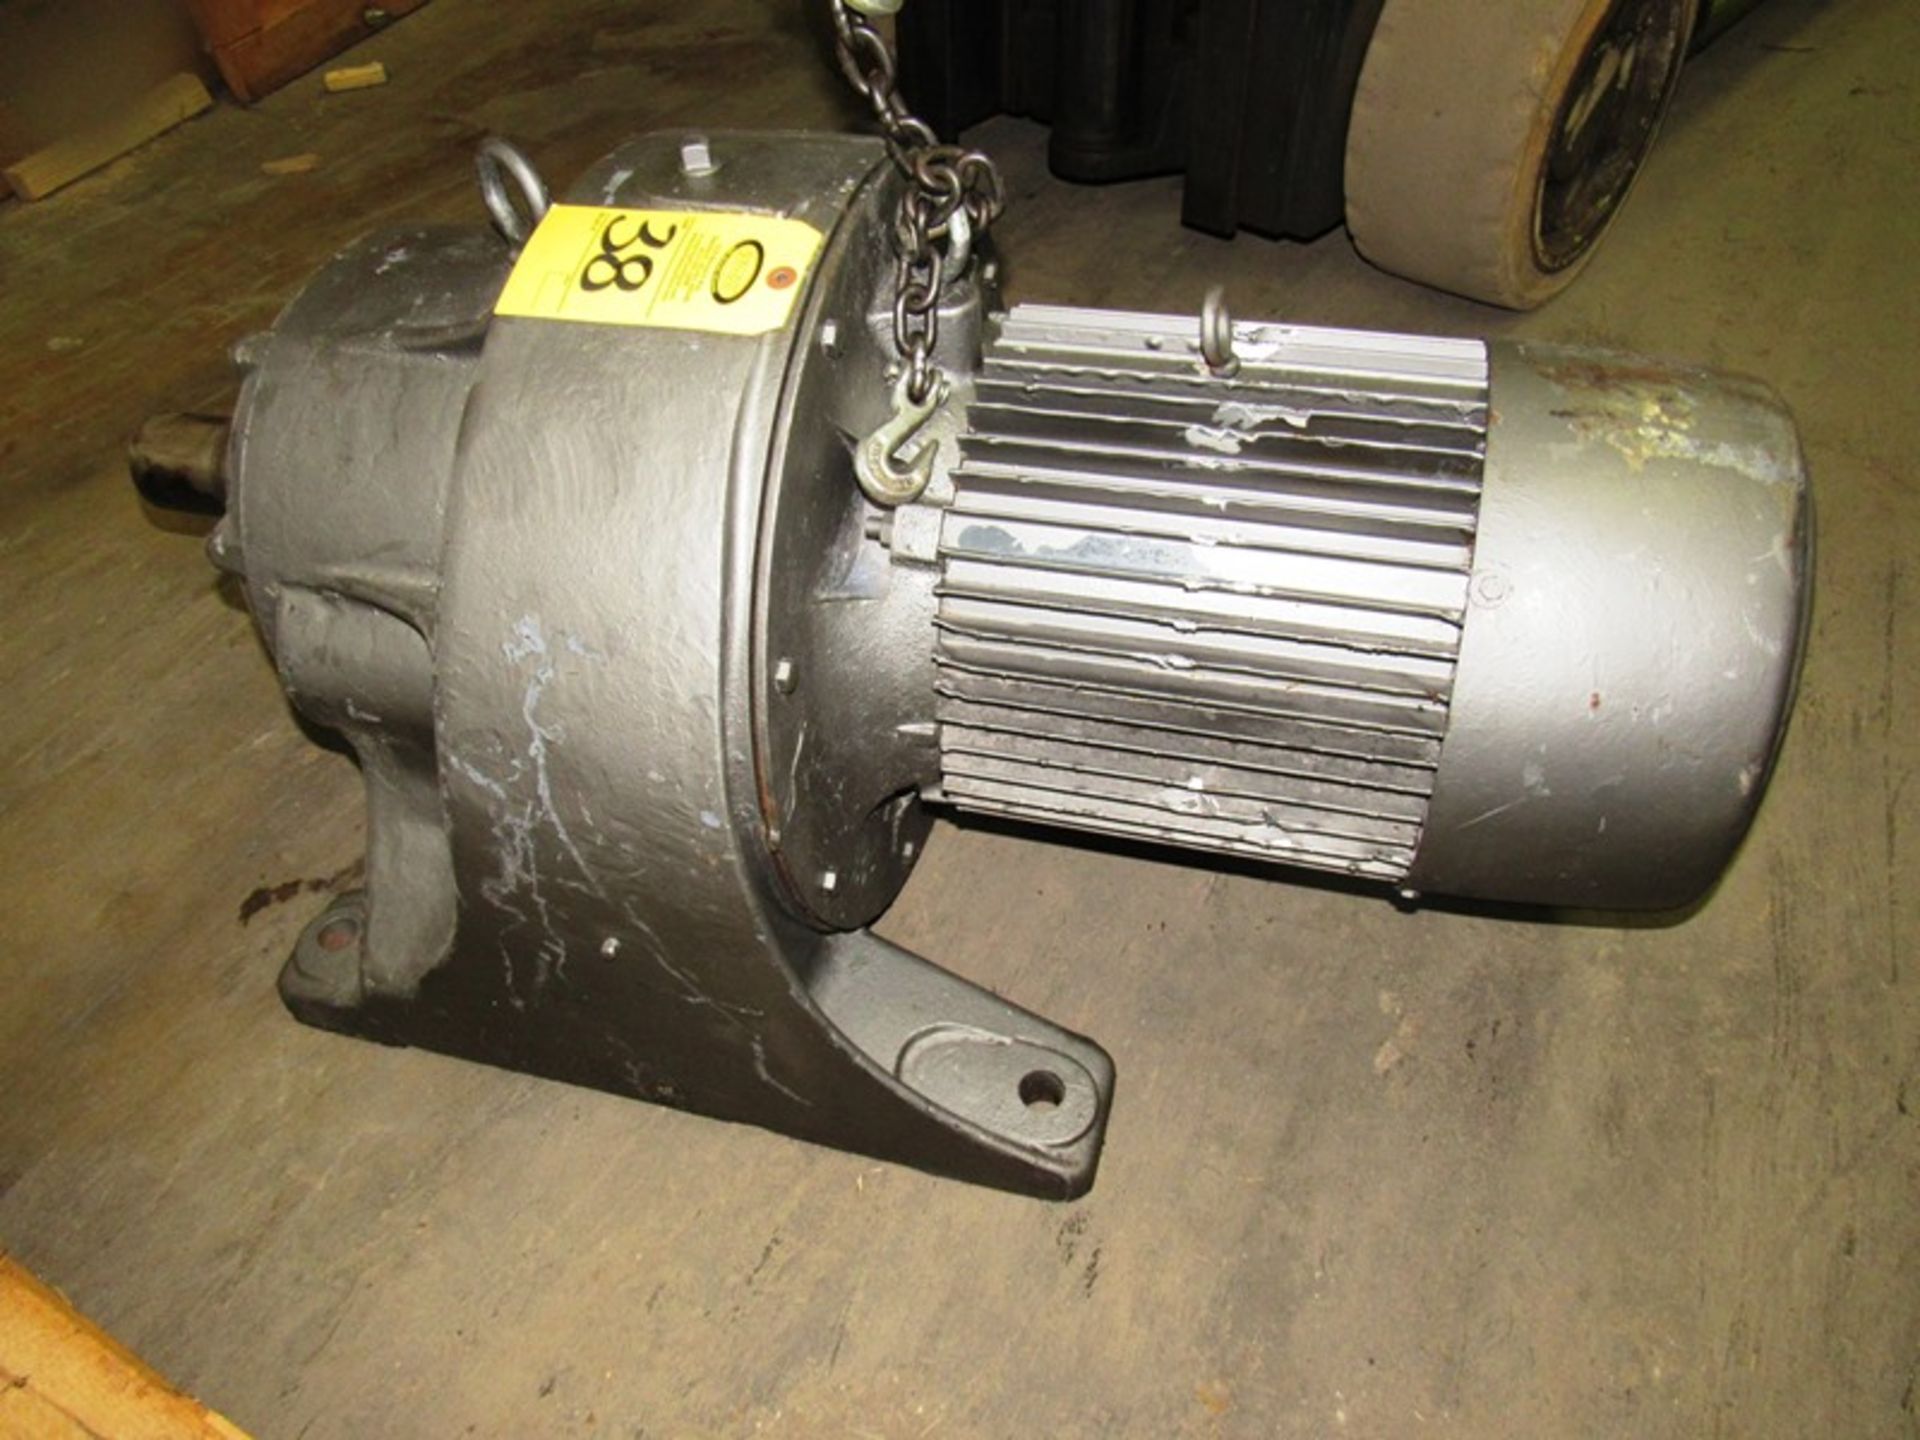 Motor/Gearbox, 10 h.p., 1740 RPM, 230 volts, on gearbox